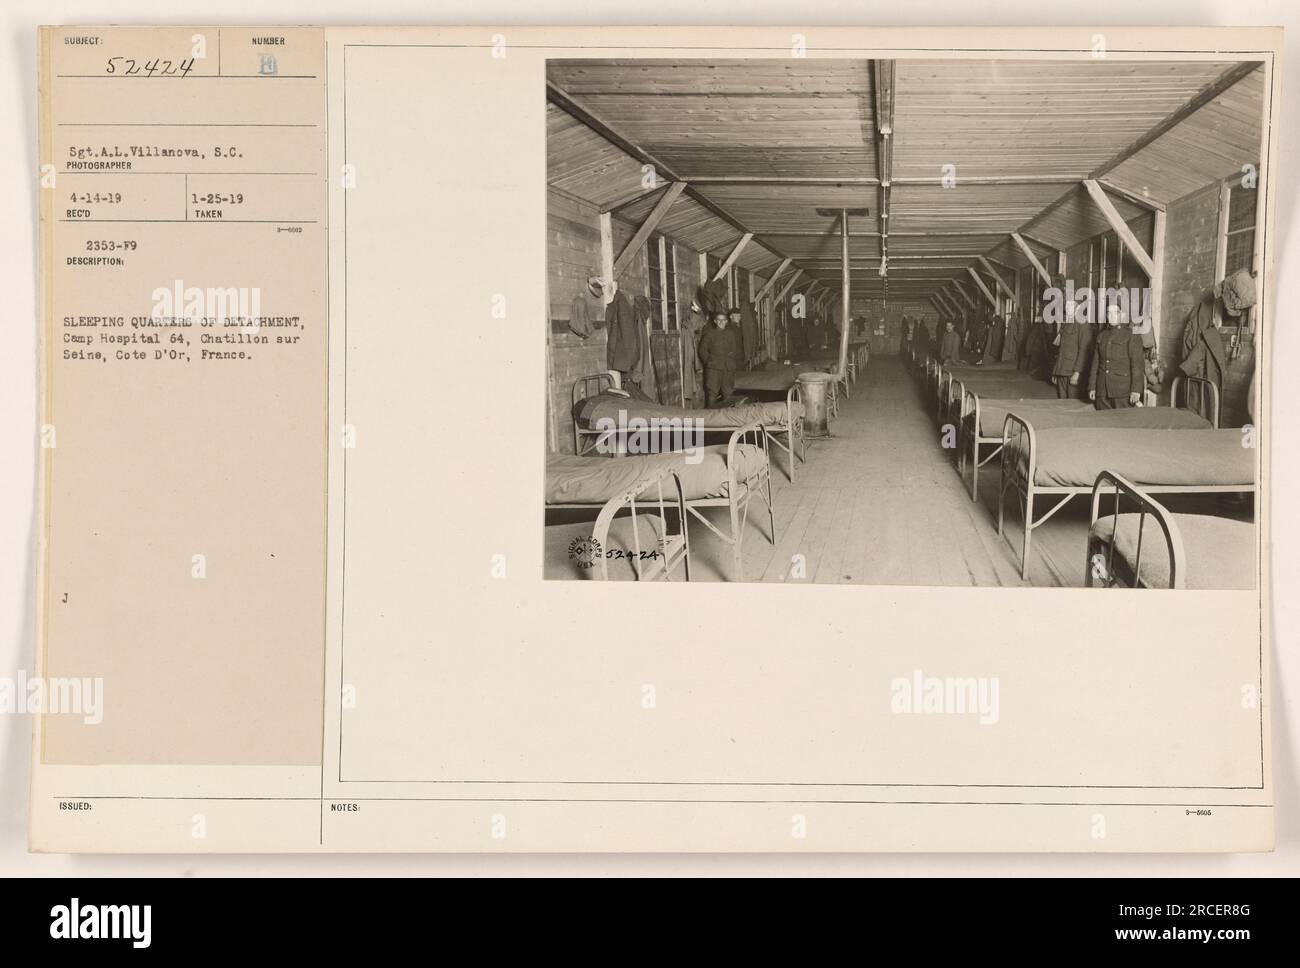 Image of the sleeping quarters of a detachment at Camp Hospital 64 in Chatillon sur Seine, Cote d'Or, France. Taken on April 14, 1919 by Sgt. A.L. Villanova, S.C. This image is numbered 52424 and was issued on January 25, 1919. Stock Photo